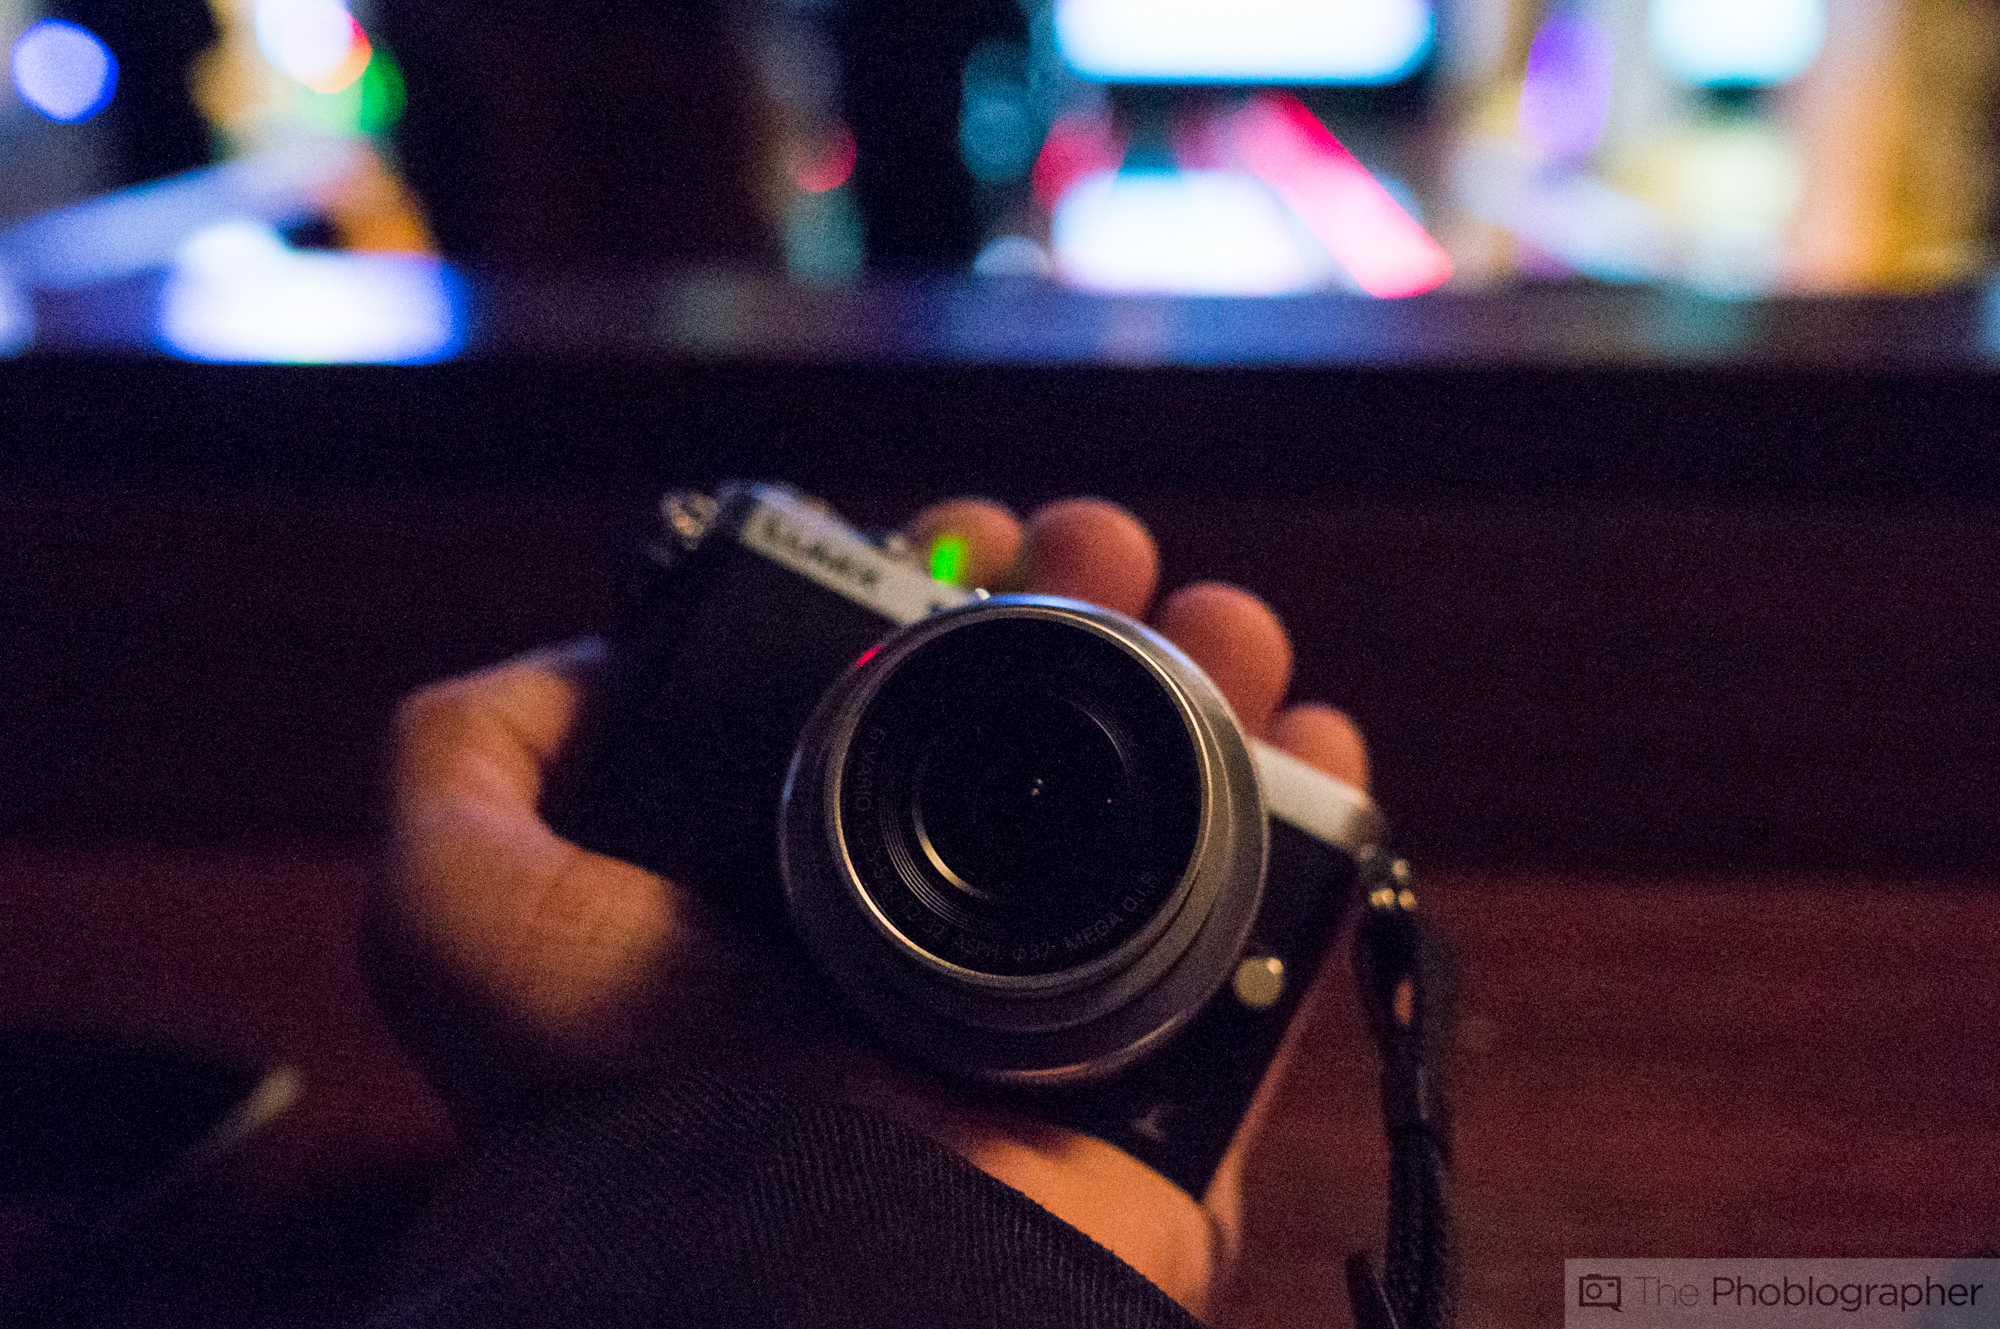 Panasonic's Lumix GM1 is the smallest Micro Four Thirds camera yet